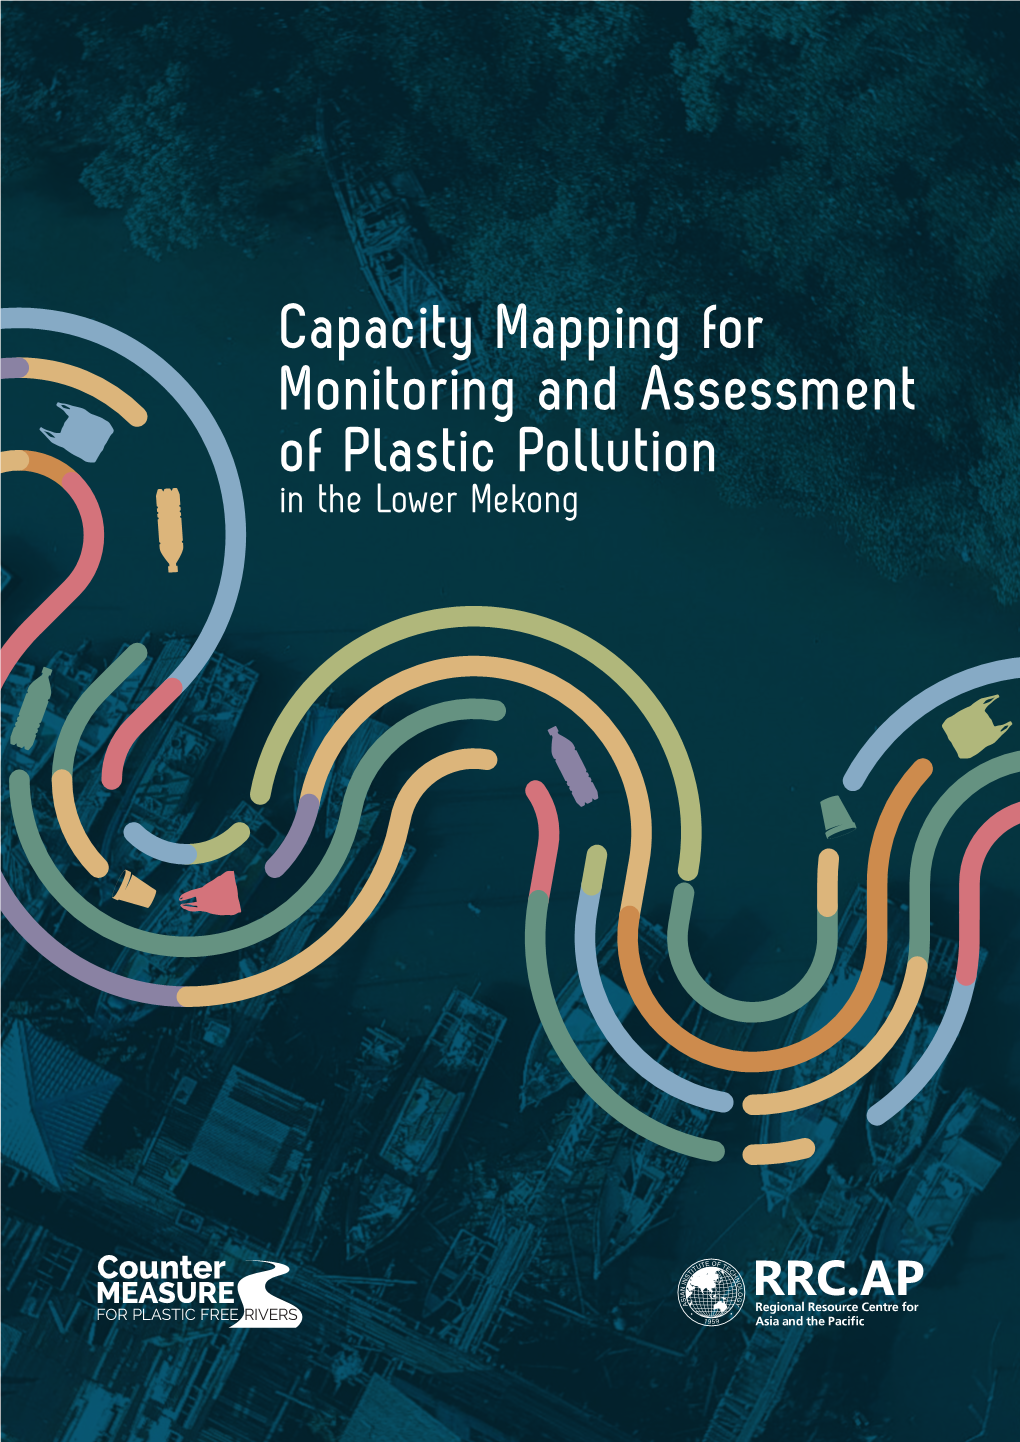 Capacity Mapping for Monitoring and Assessment of Plastic Pollution in the Lower Mekong Published in Pathumthani, Thailand in 2020 by Asian Institute of Technology